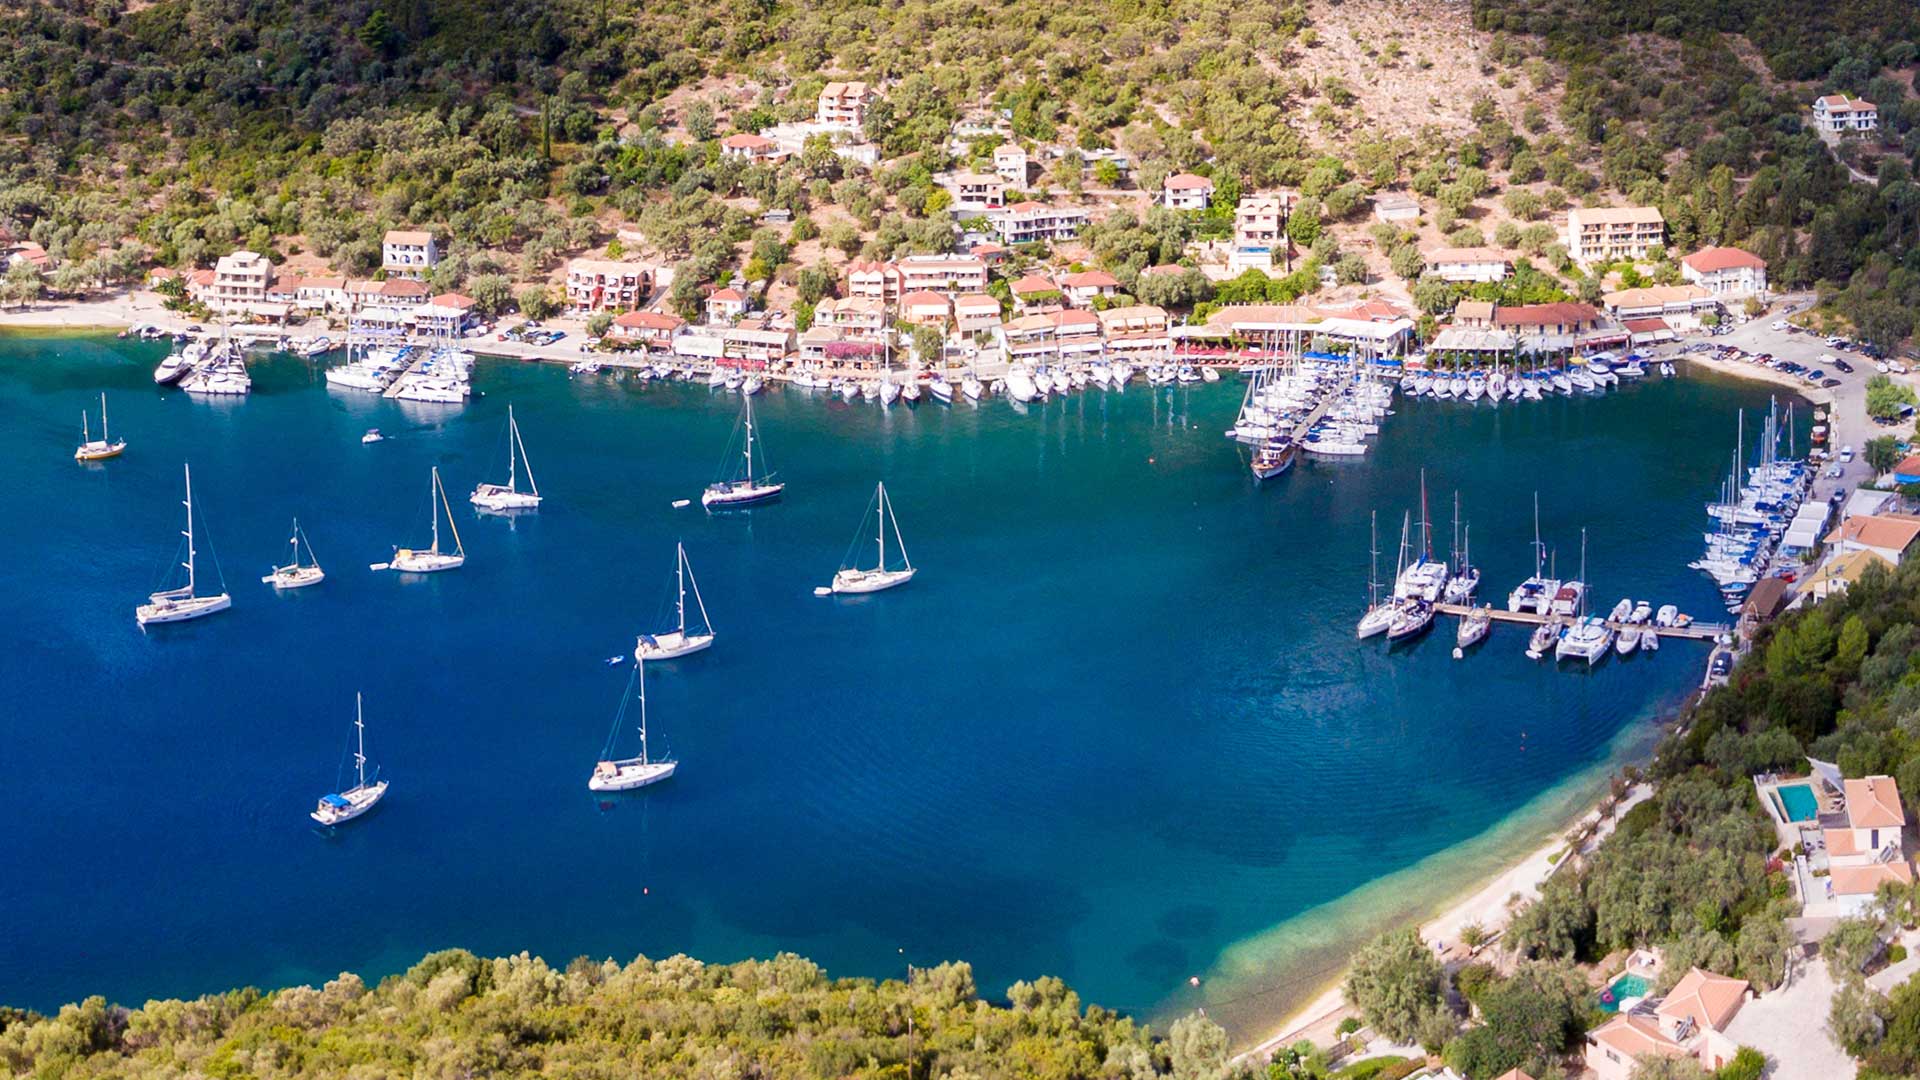 Idyllic view of Syvota Bay in Lefkada, dotted with yachts and surrounded by lush real estate.